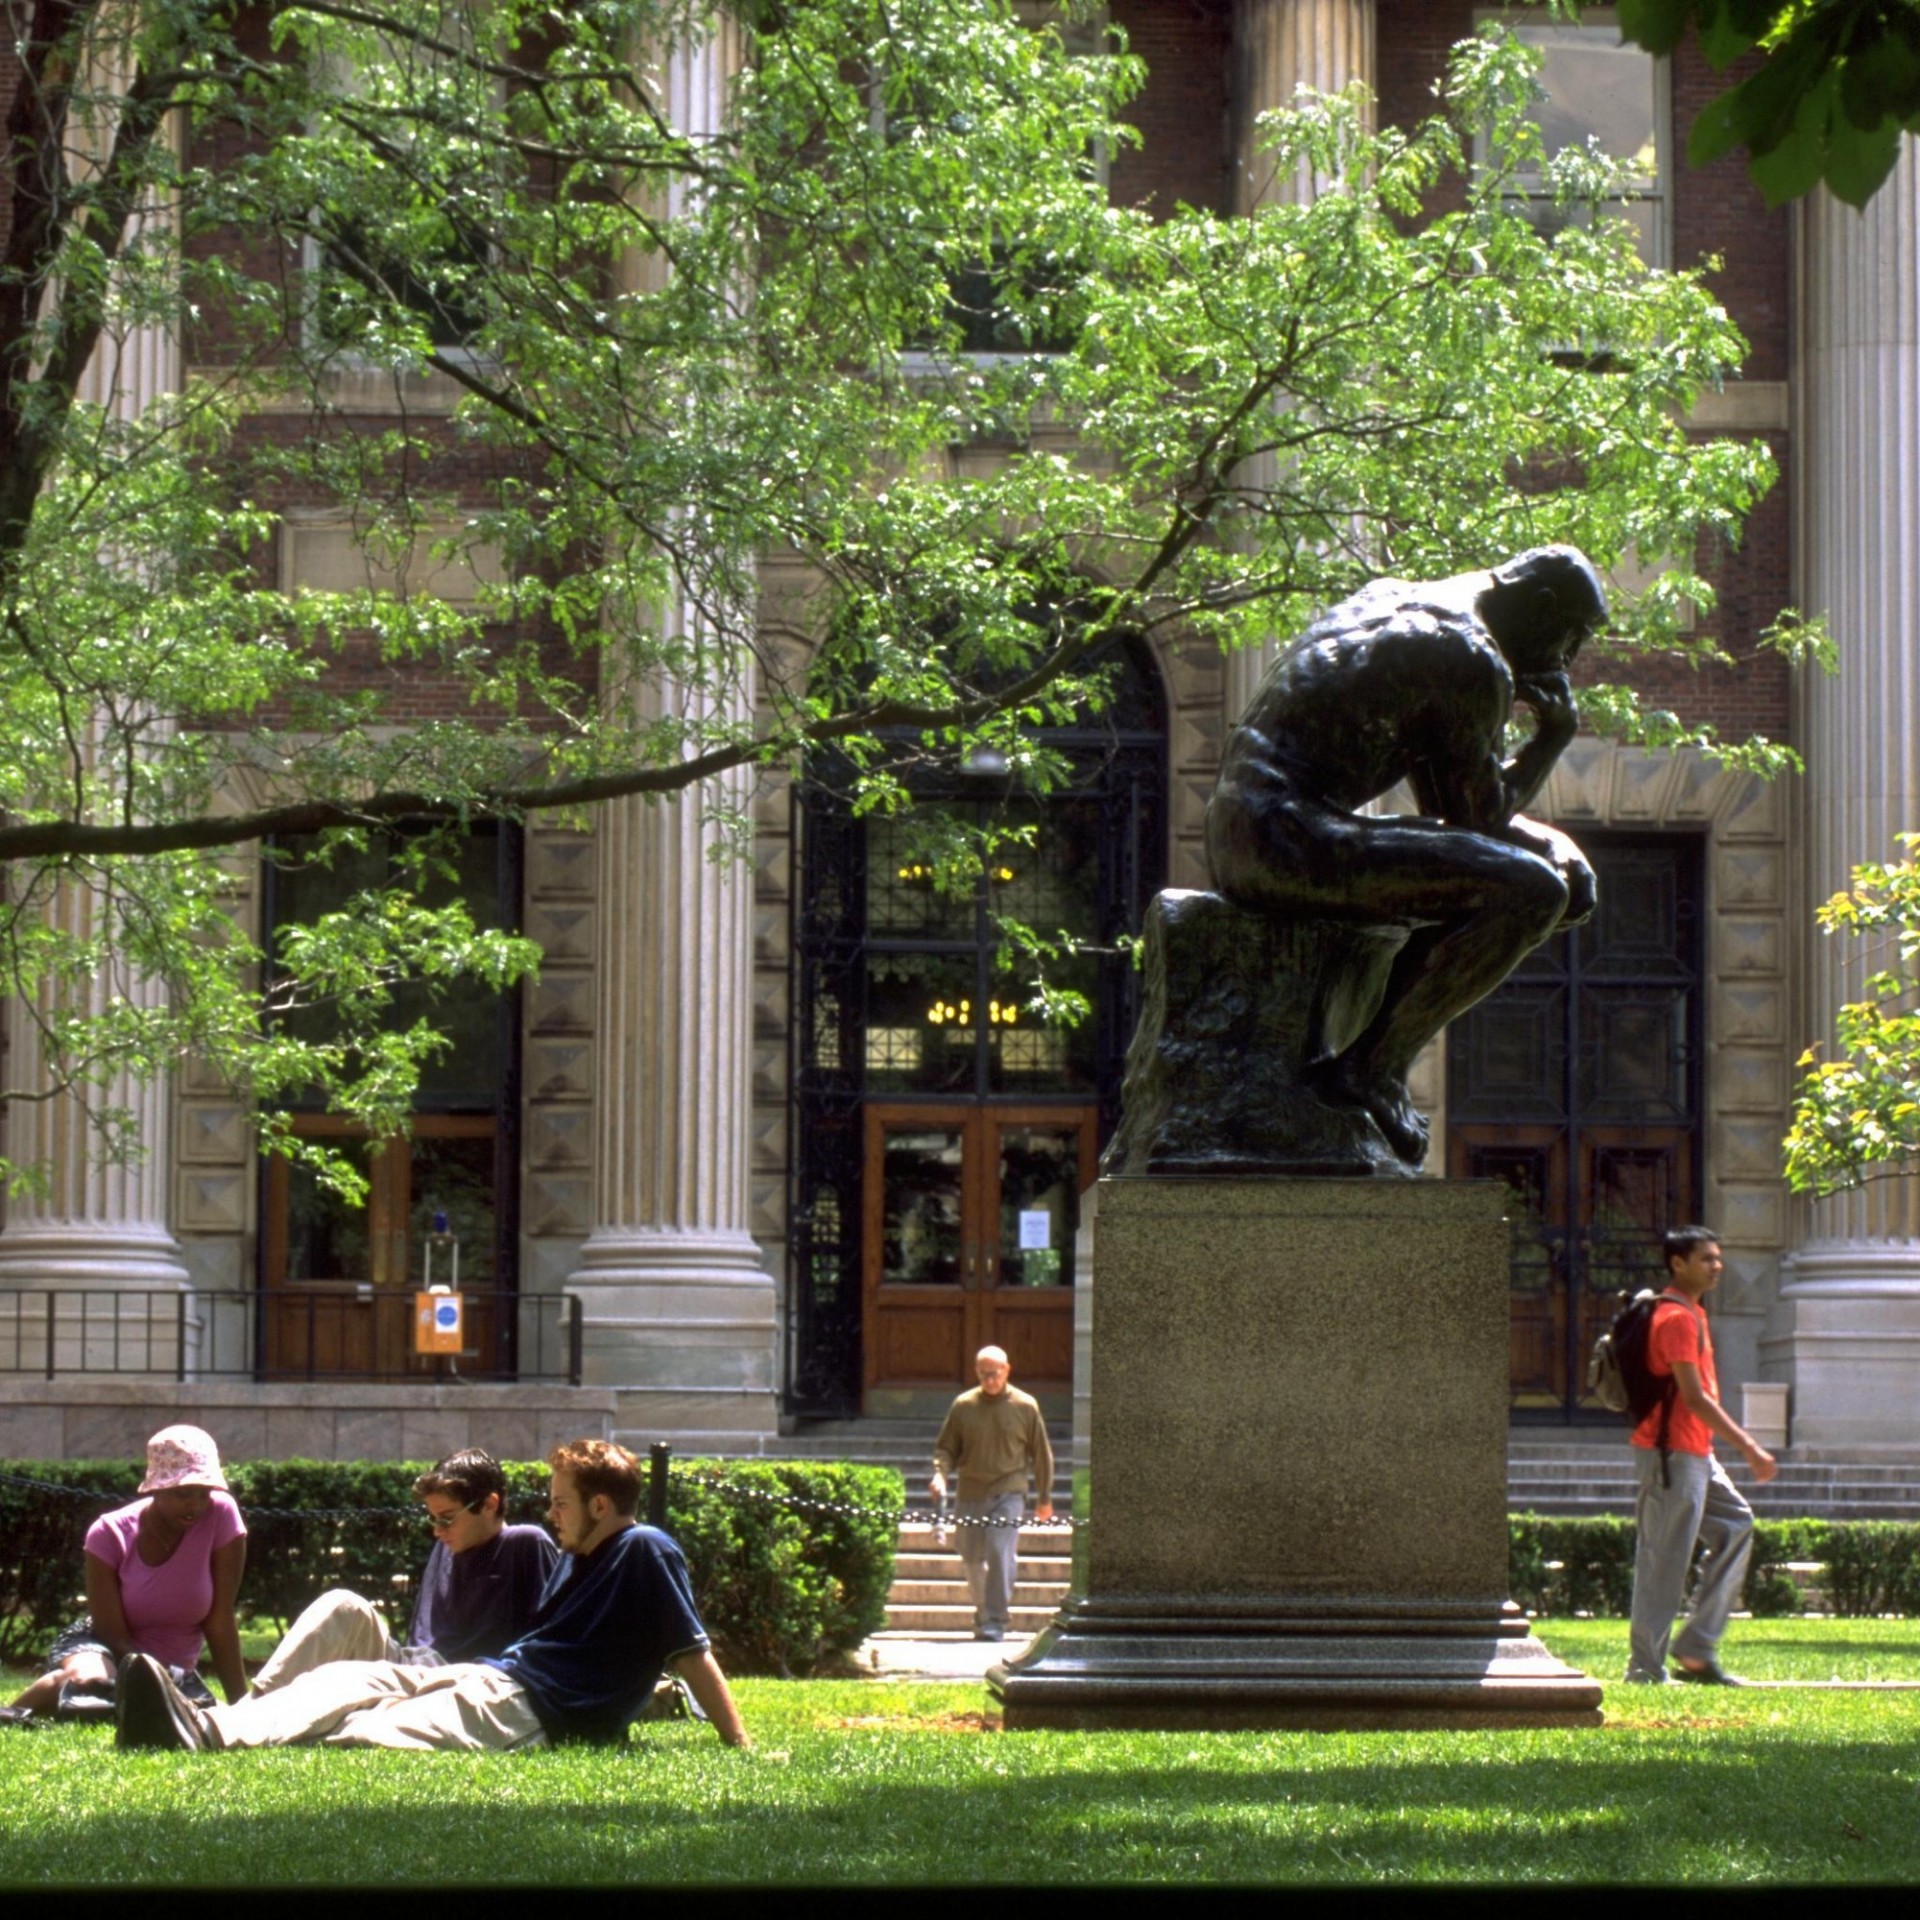 Young adults sitting outside next to statue of a man with his head on his hand.